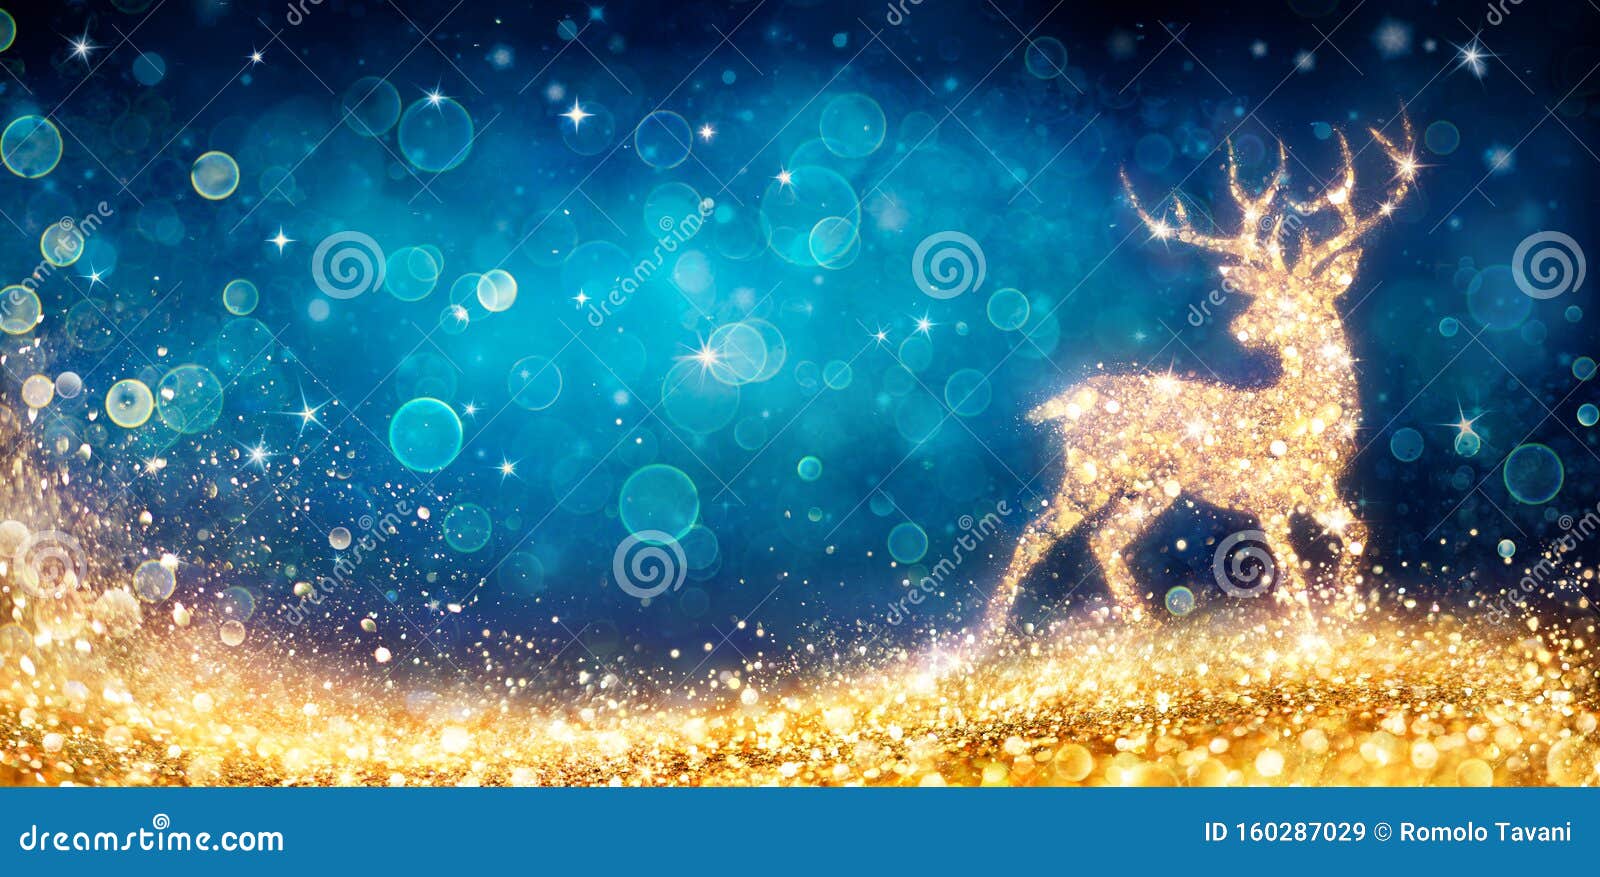 Christmas - Magic Golden Deer in Shiny Blue Stock Image - Image of ...